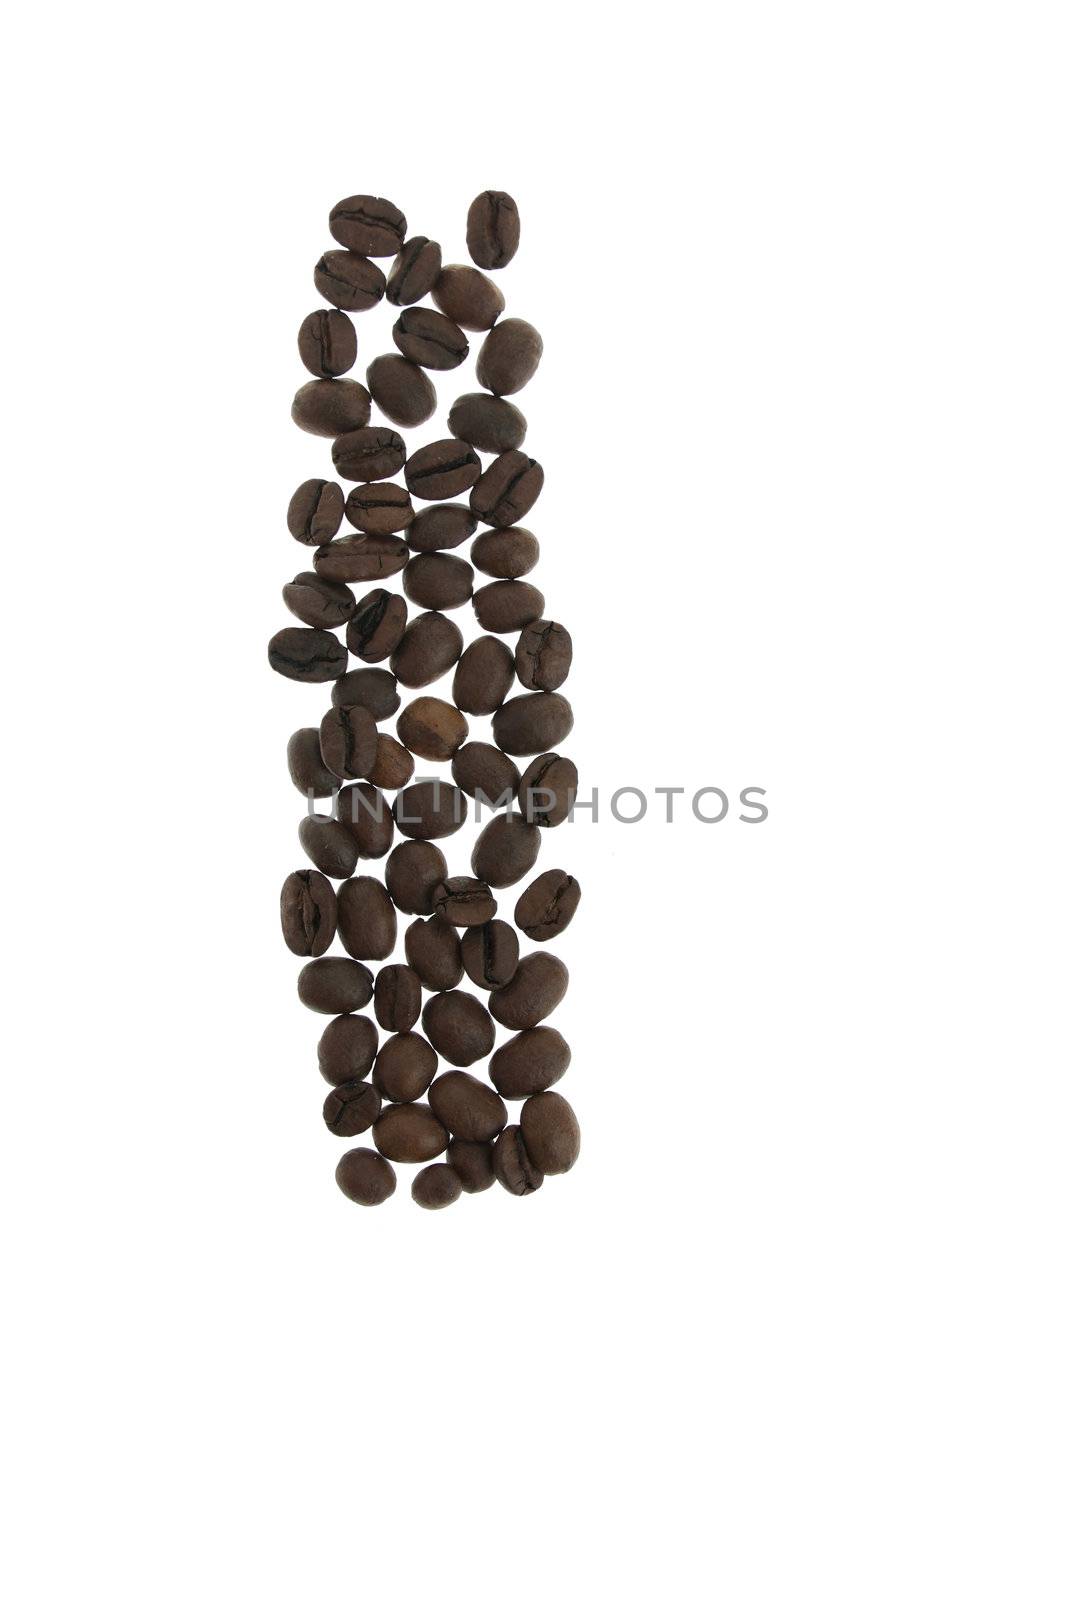 Coffe letter I isolated on white background